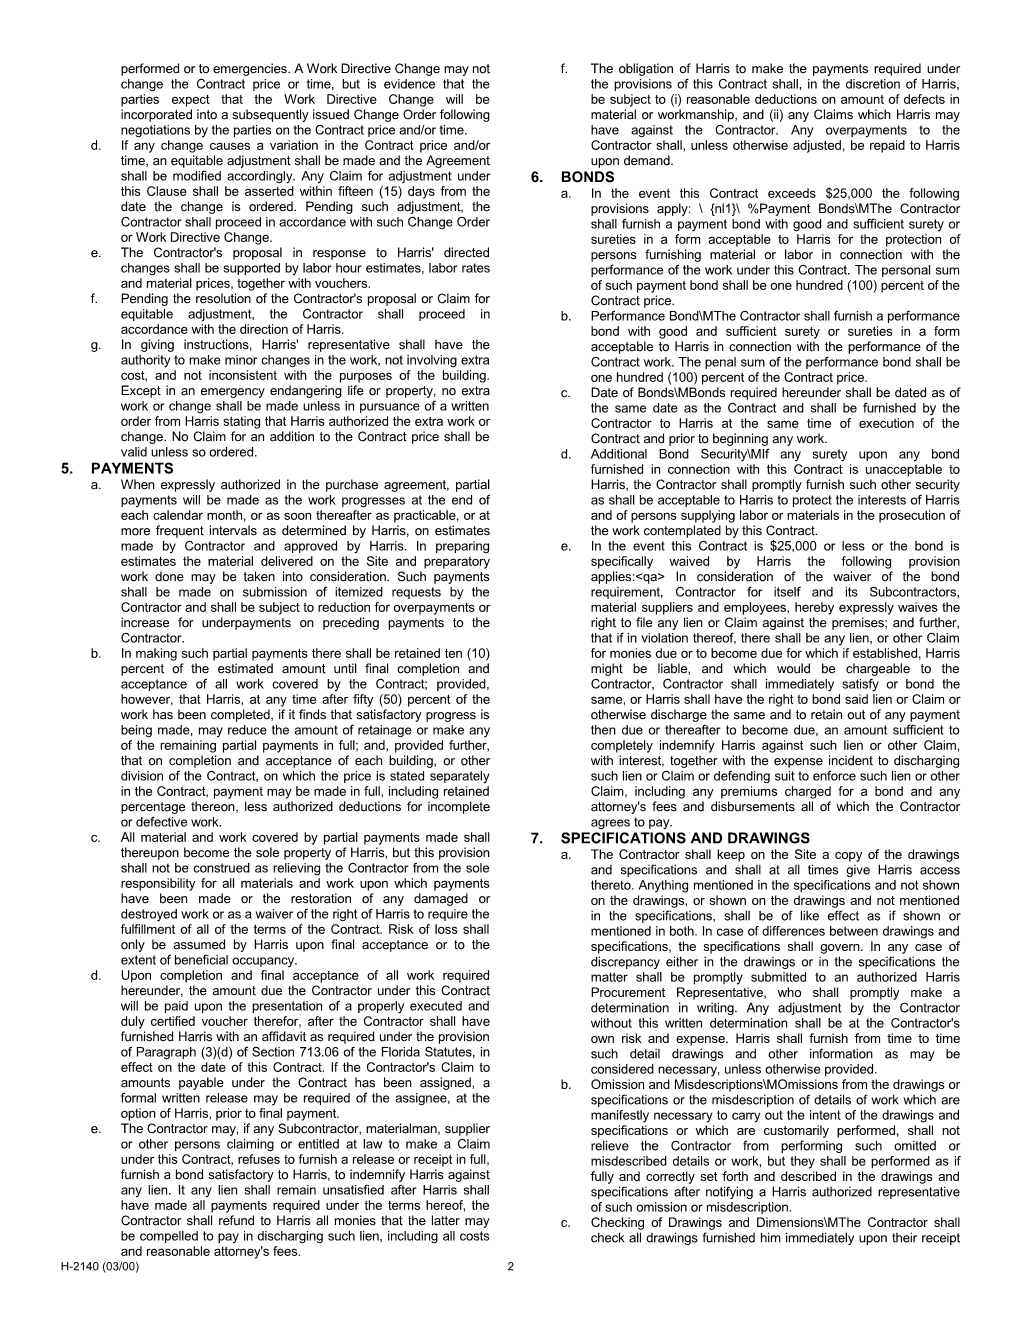 H-2140, General Provisions - Fixed Price Construction Contract - Mar. 2000